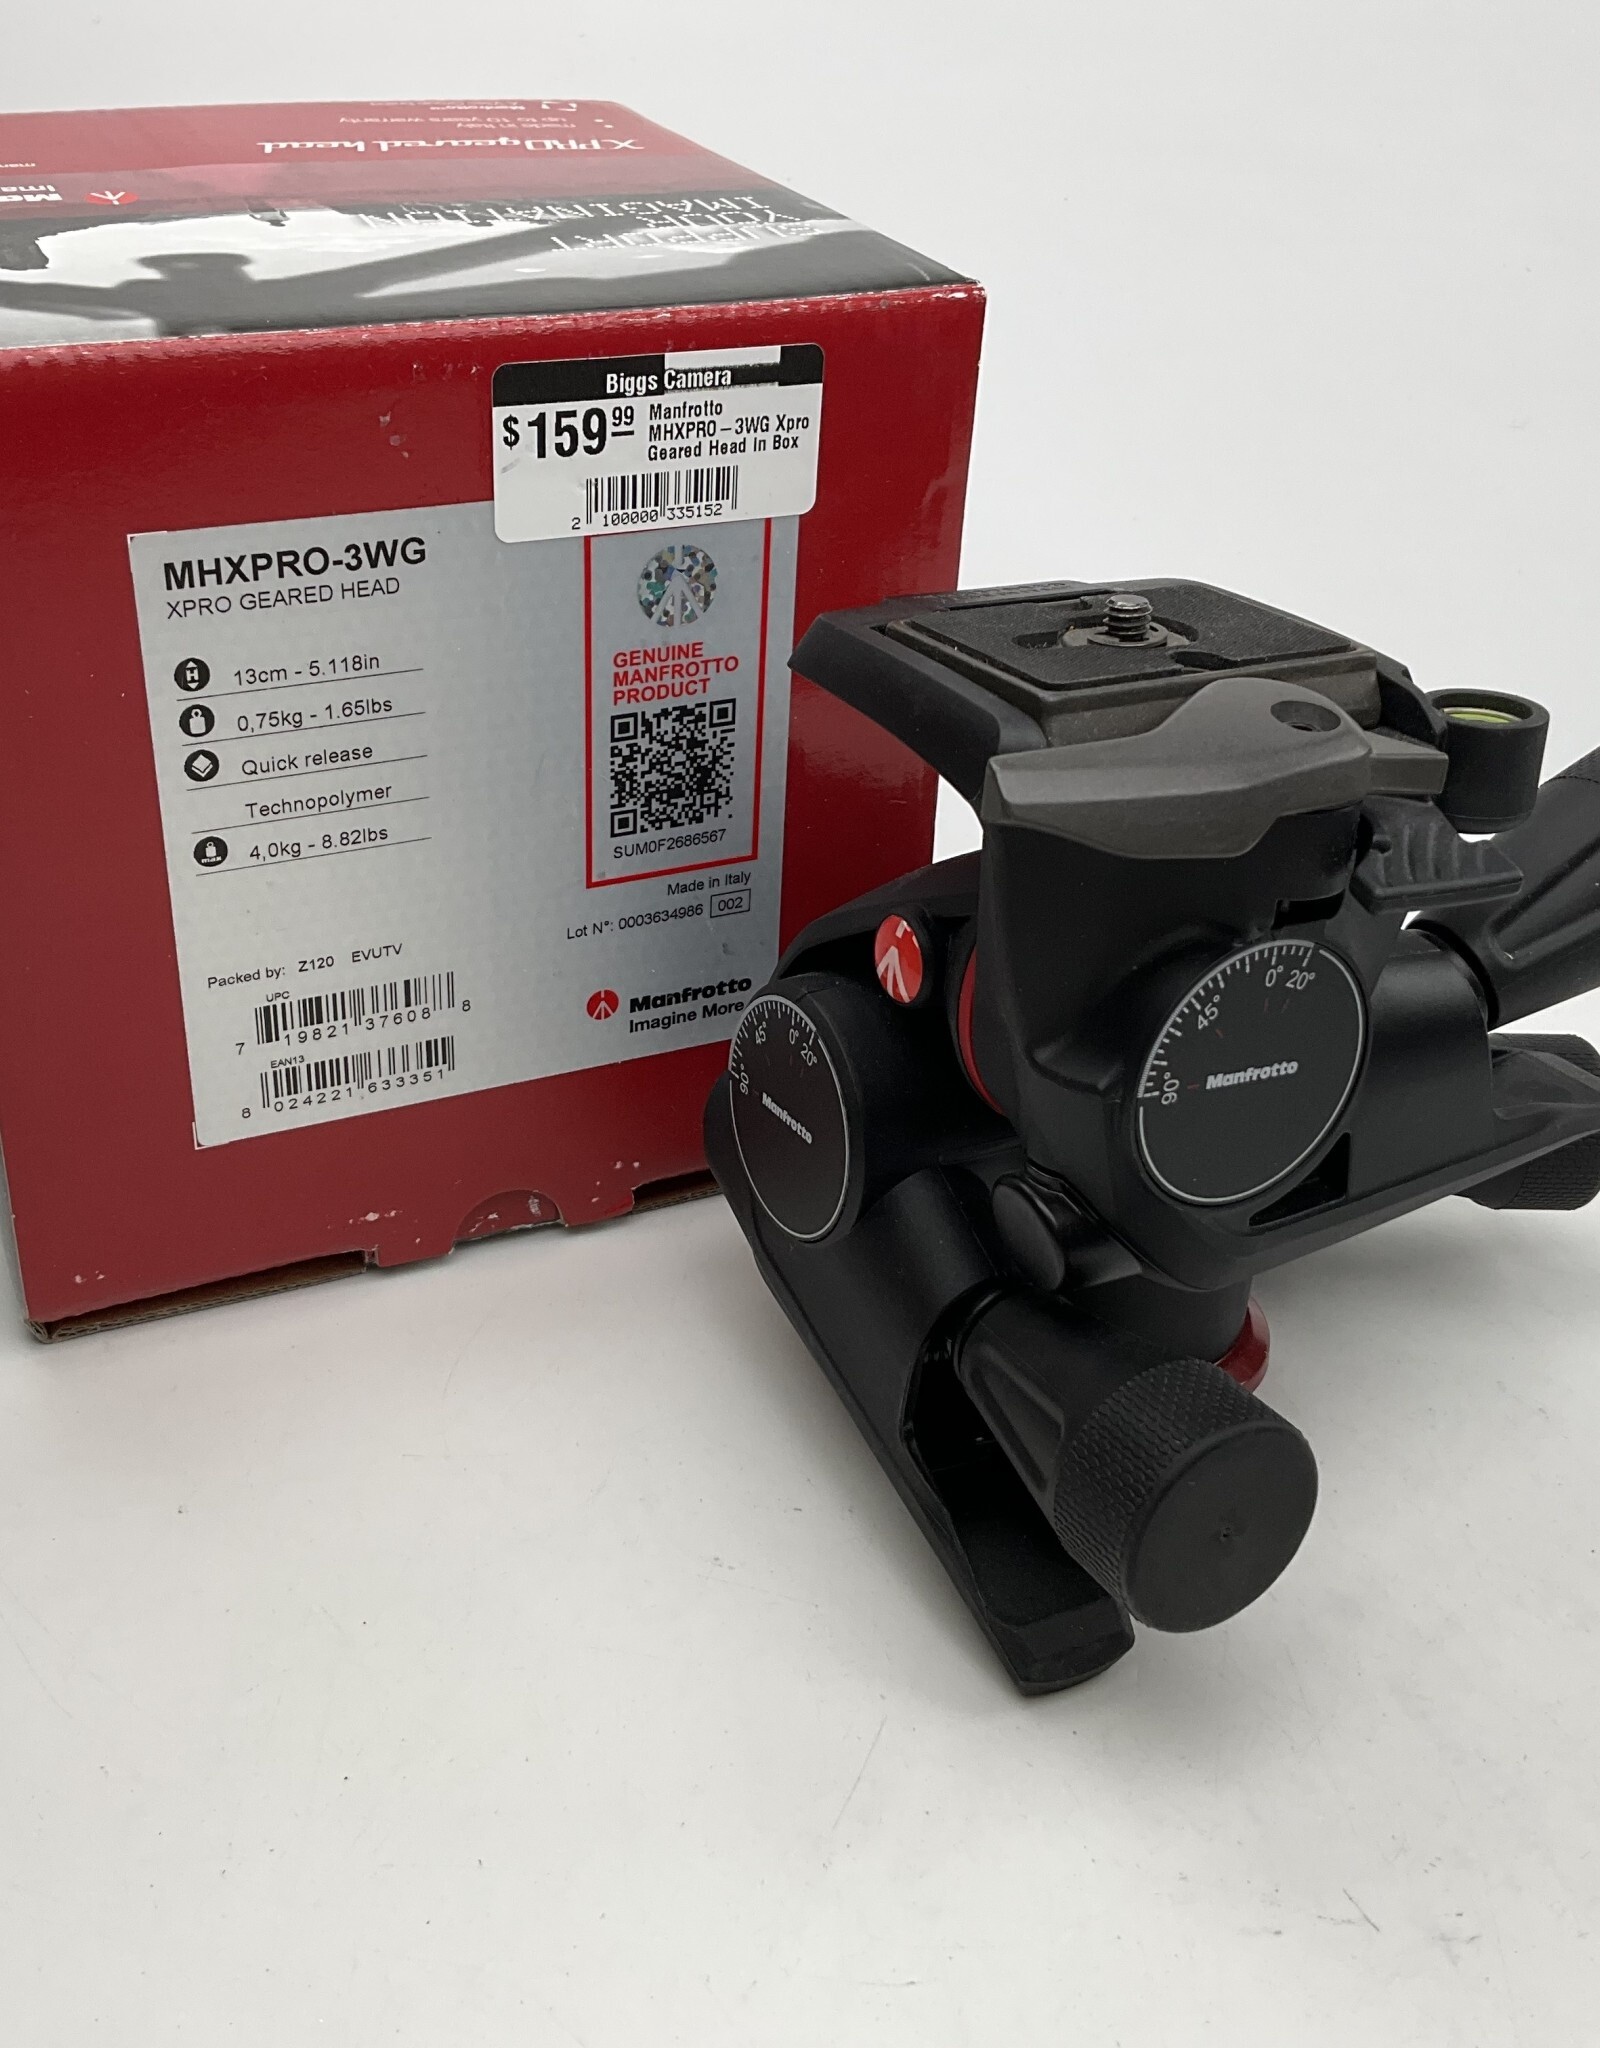 MANFROTTO Manfrotto MHXPRO-3WG Xpro Geared Head in Box Used EX